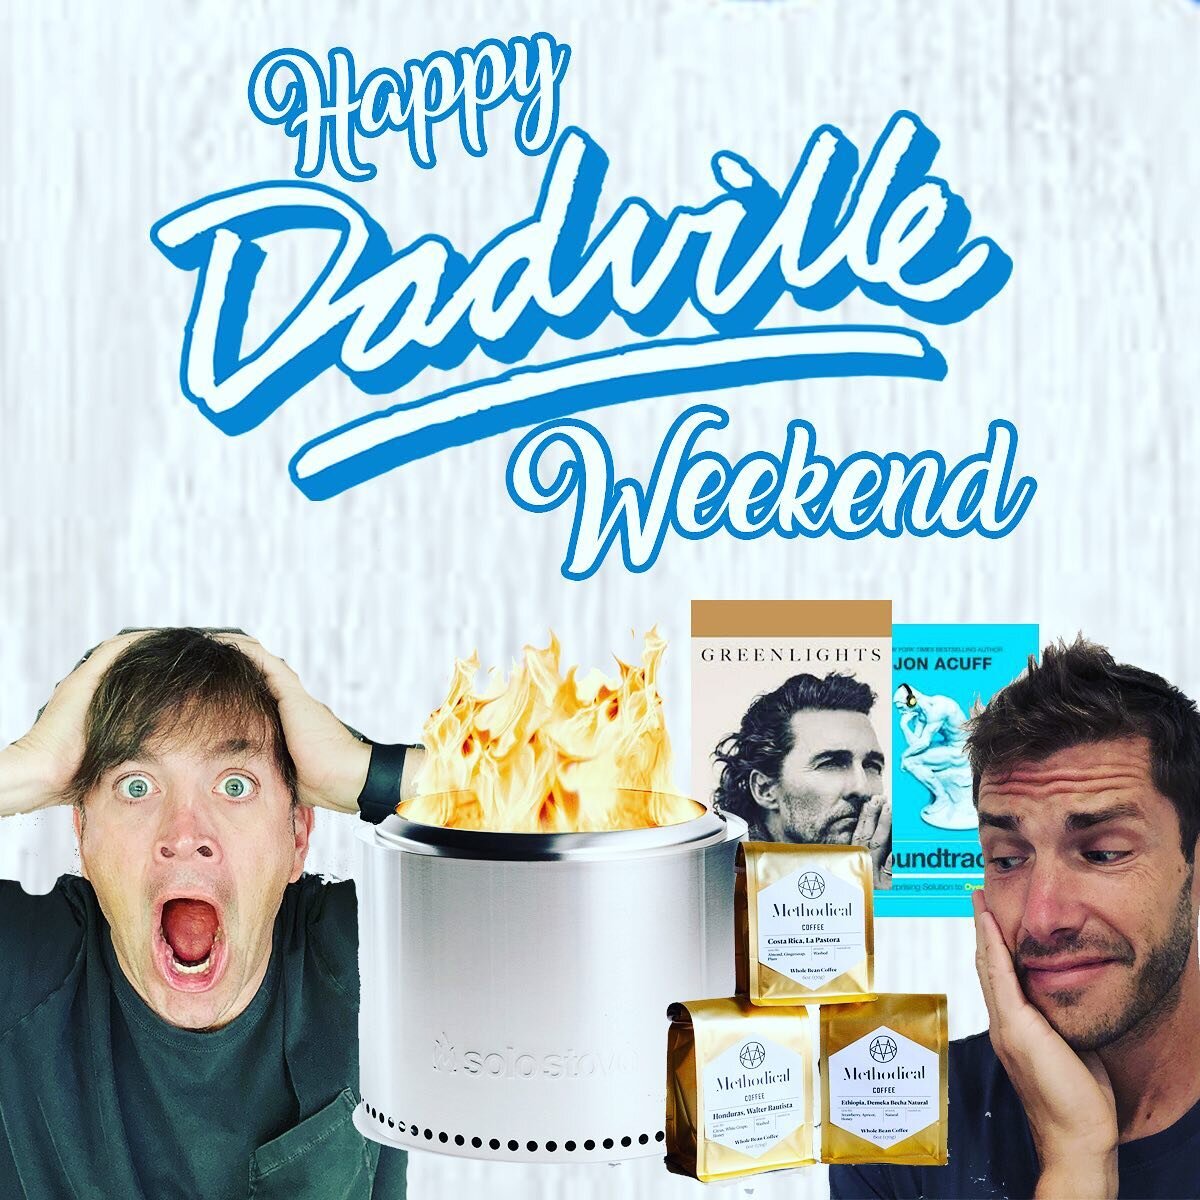 Happy Dadville Weekend! Besides a surprise new episode today where our wives interview us, we doing a crazy giveaway!!! You have the chance to win a @solostove, a @methodicalcoffee sample pack, and some of our favorite books from @officiallymcconaugh